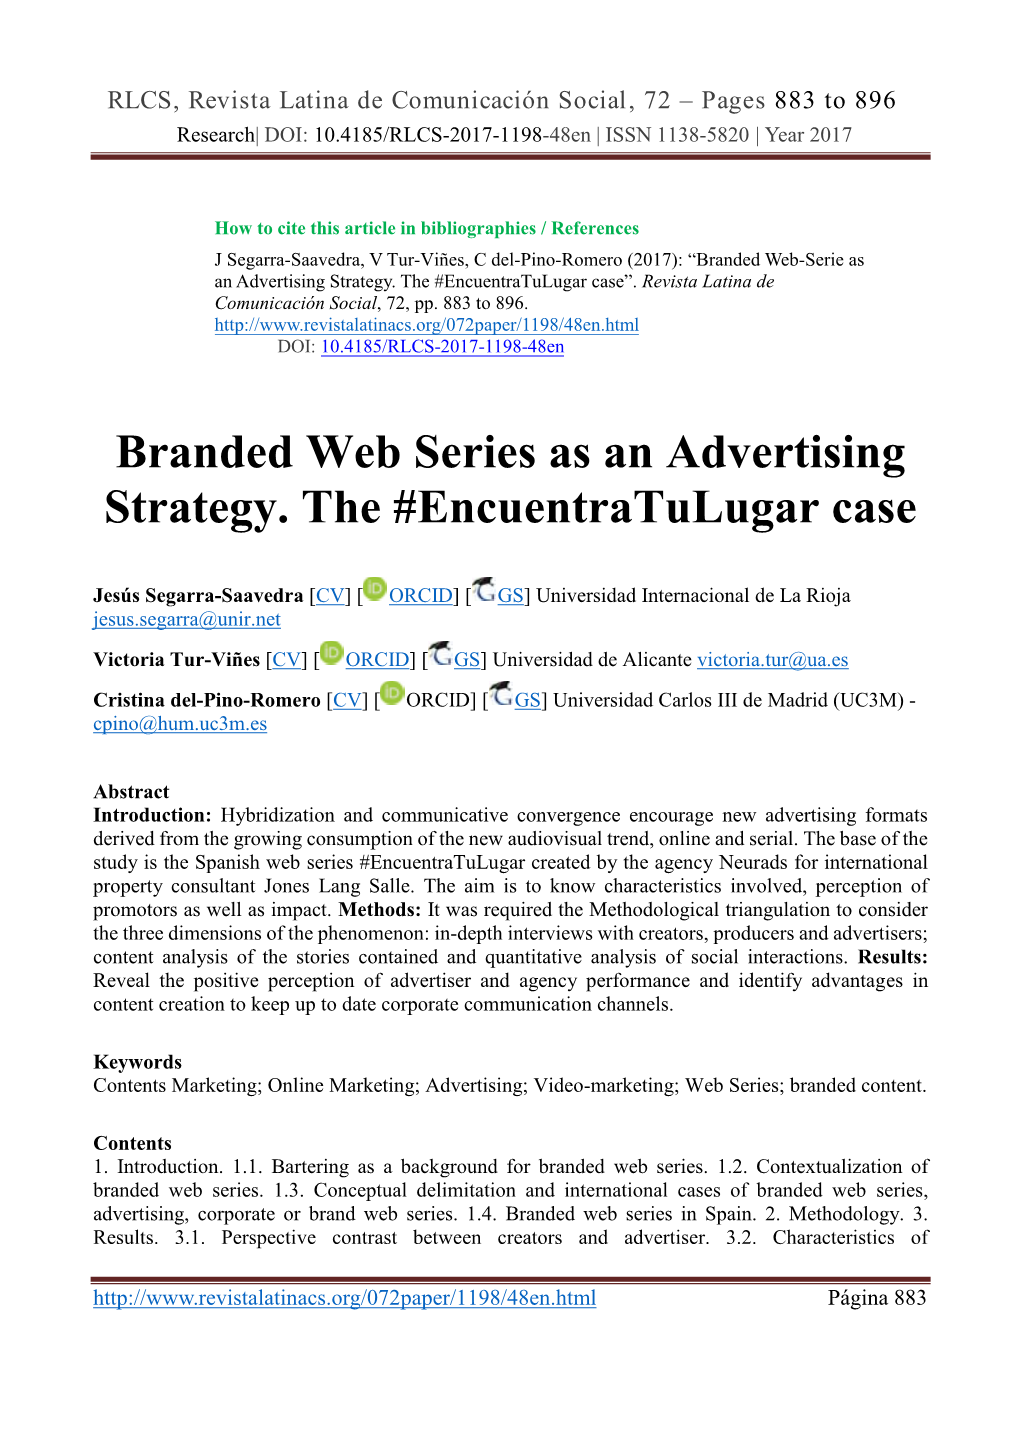 Branded Web Series As an Advertising Strategy. the #Encuentratulugar Case